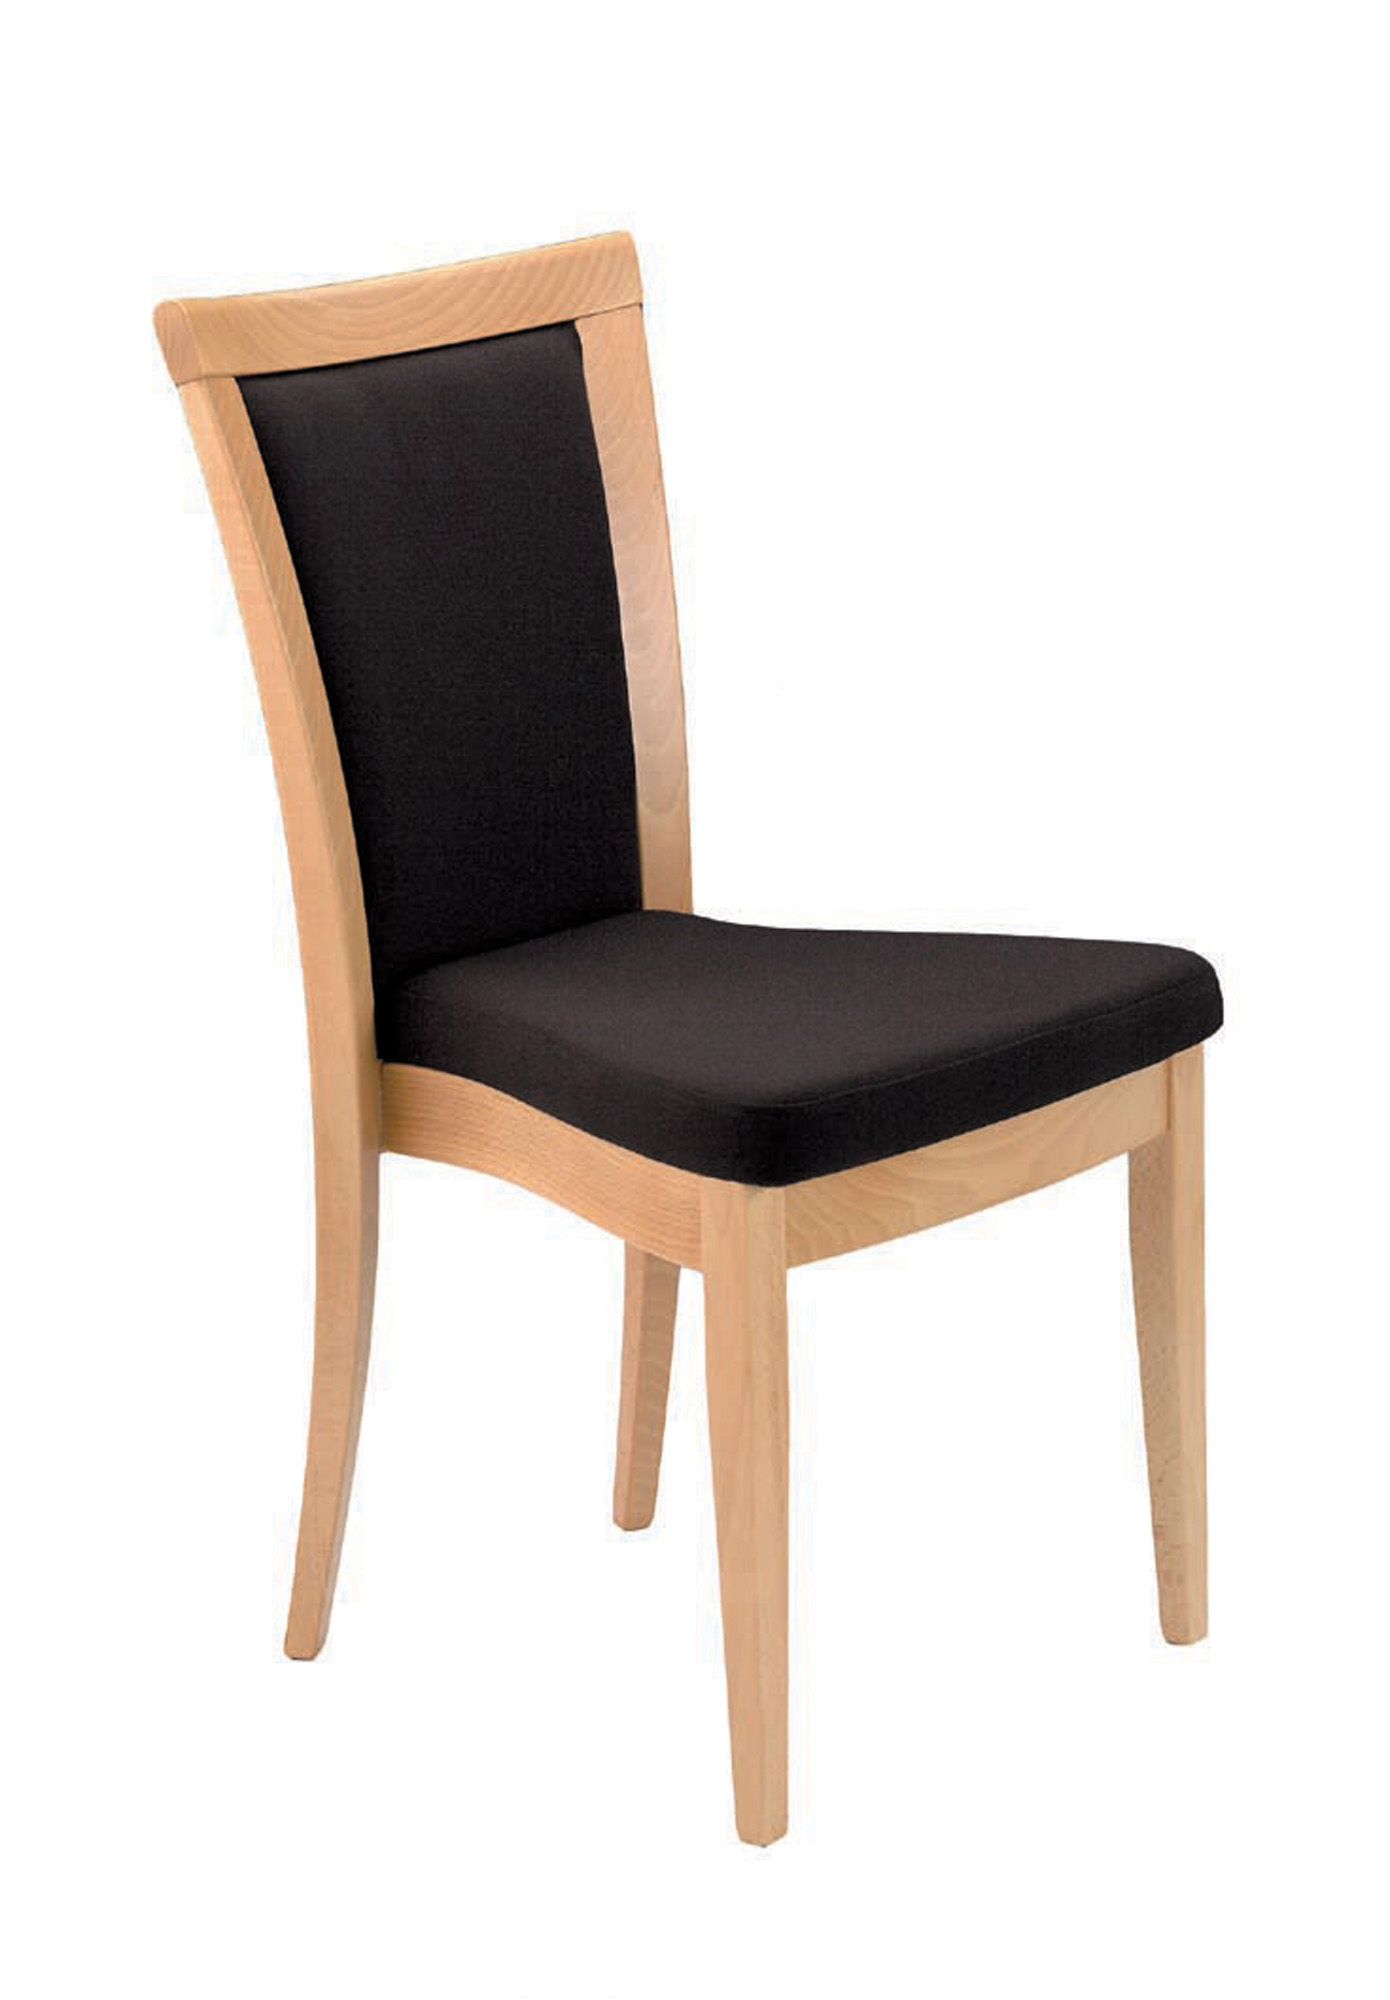 Westbury Wood Frame Conference Chair